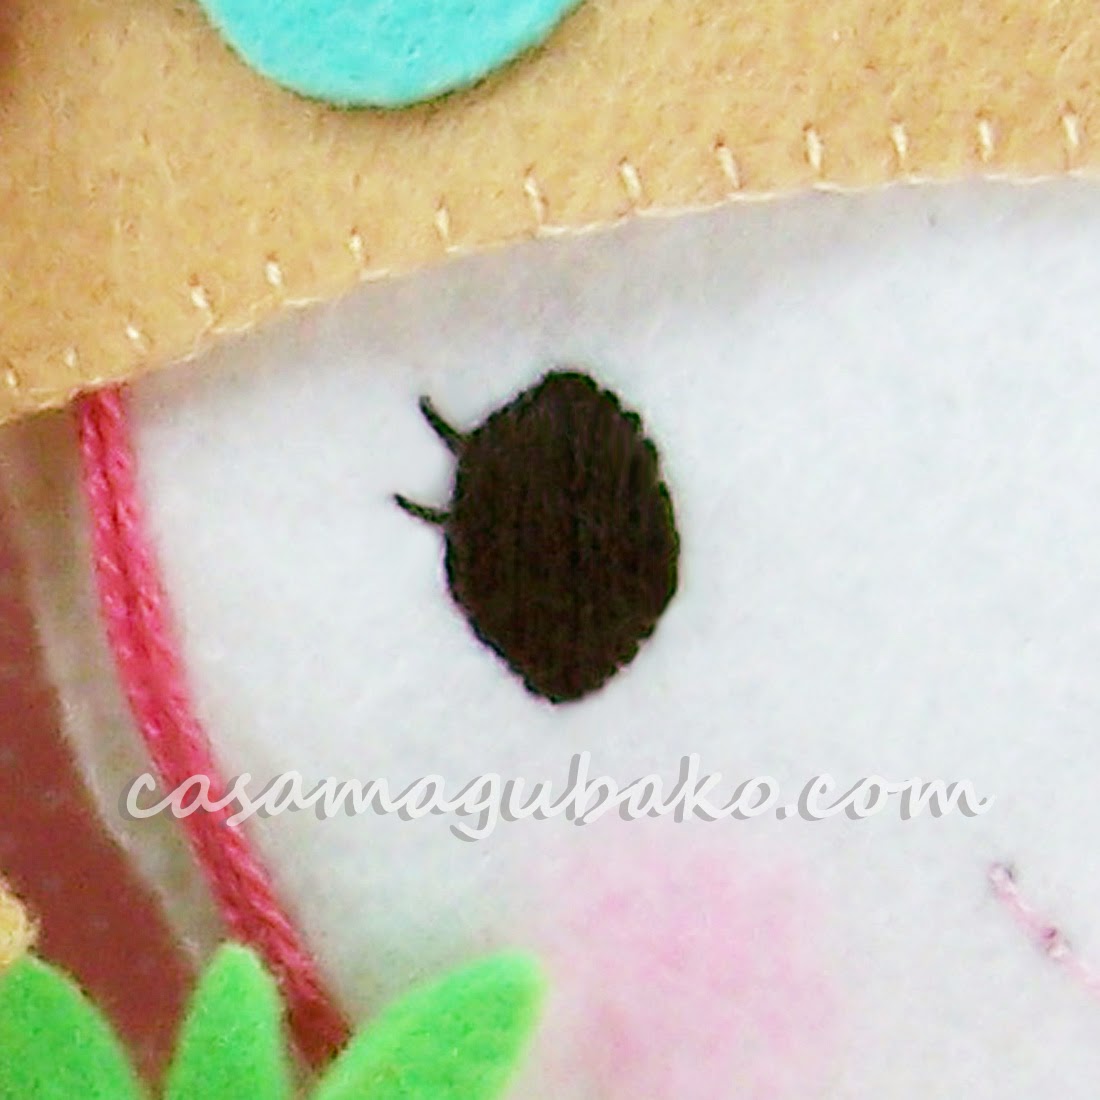 Embroidering Facial Features in Felt by casamagubako.com